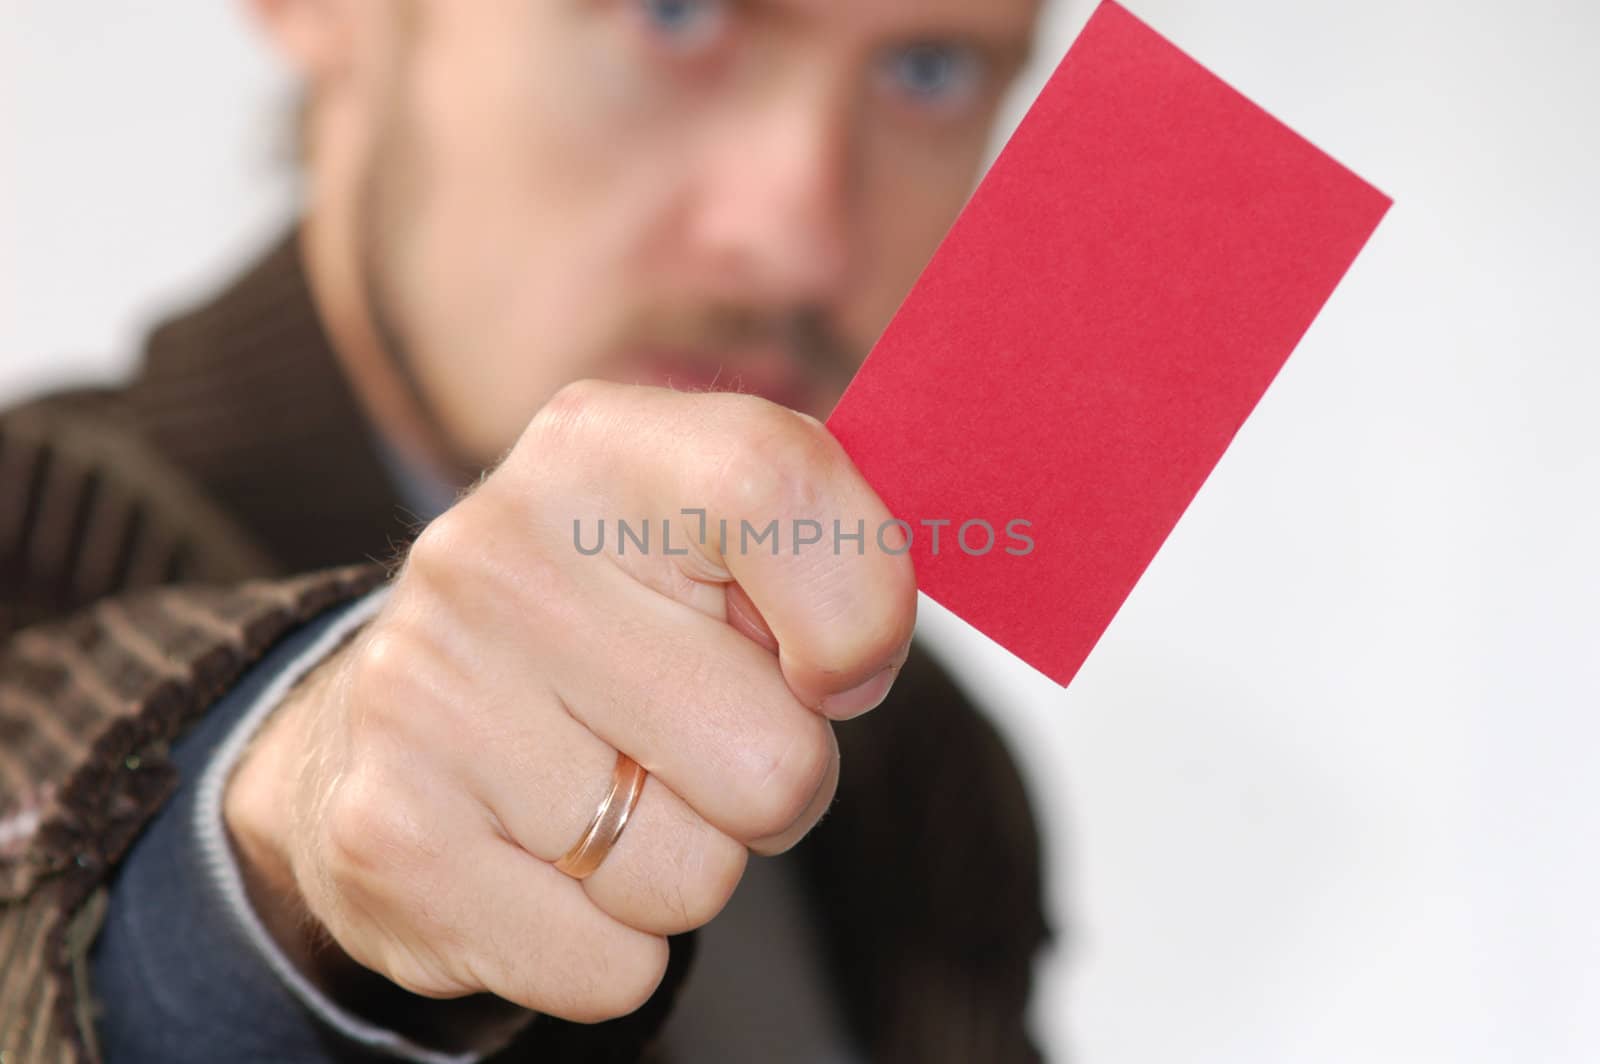 An image of men showing red card